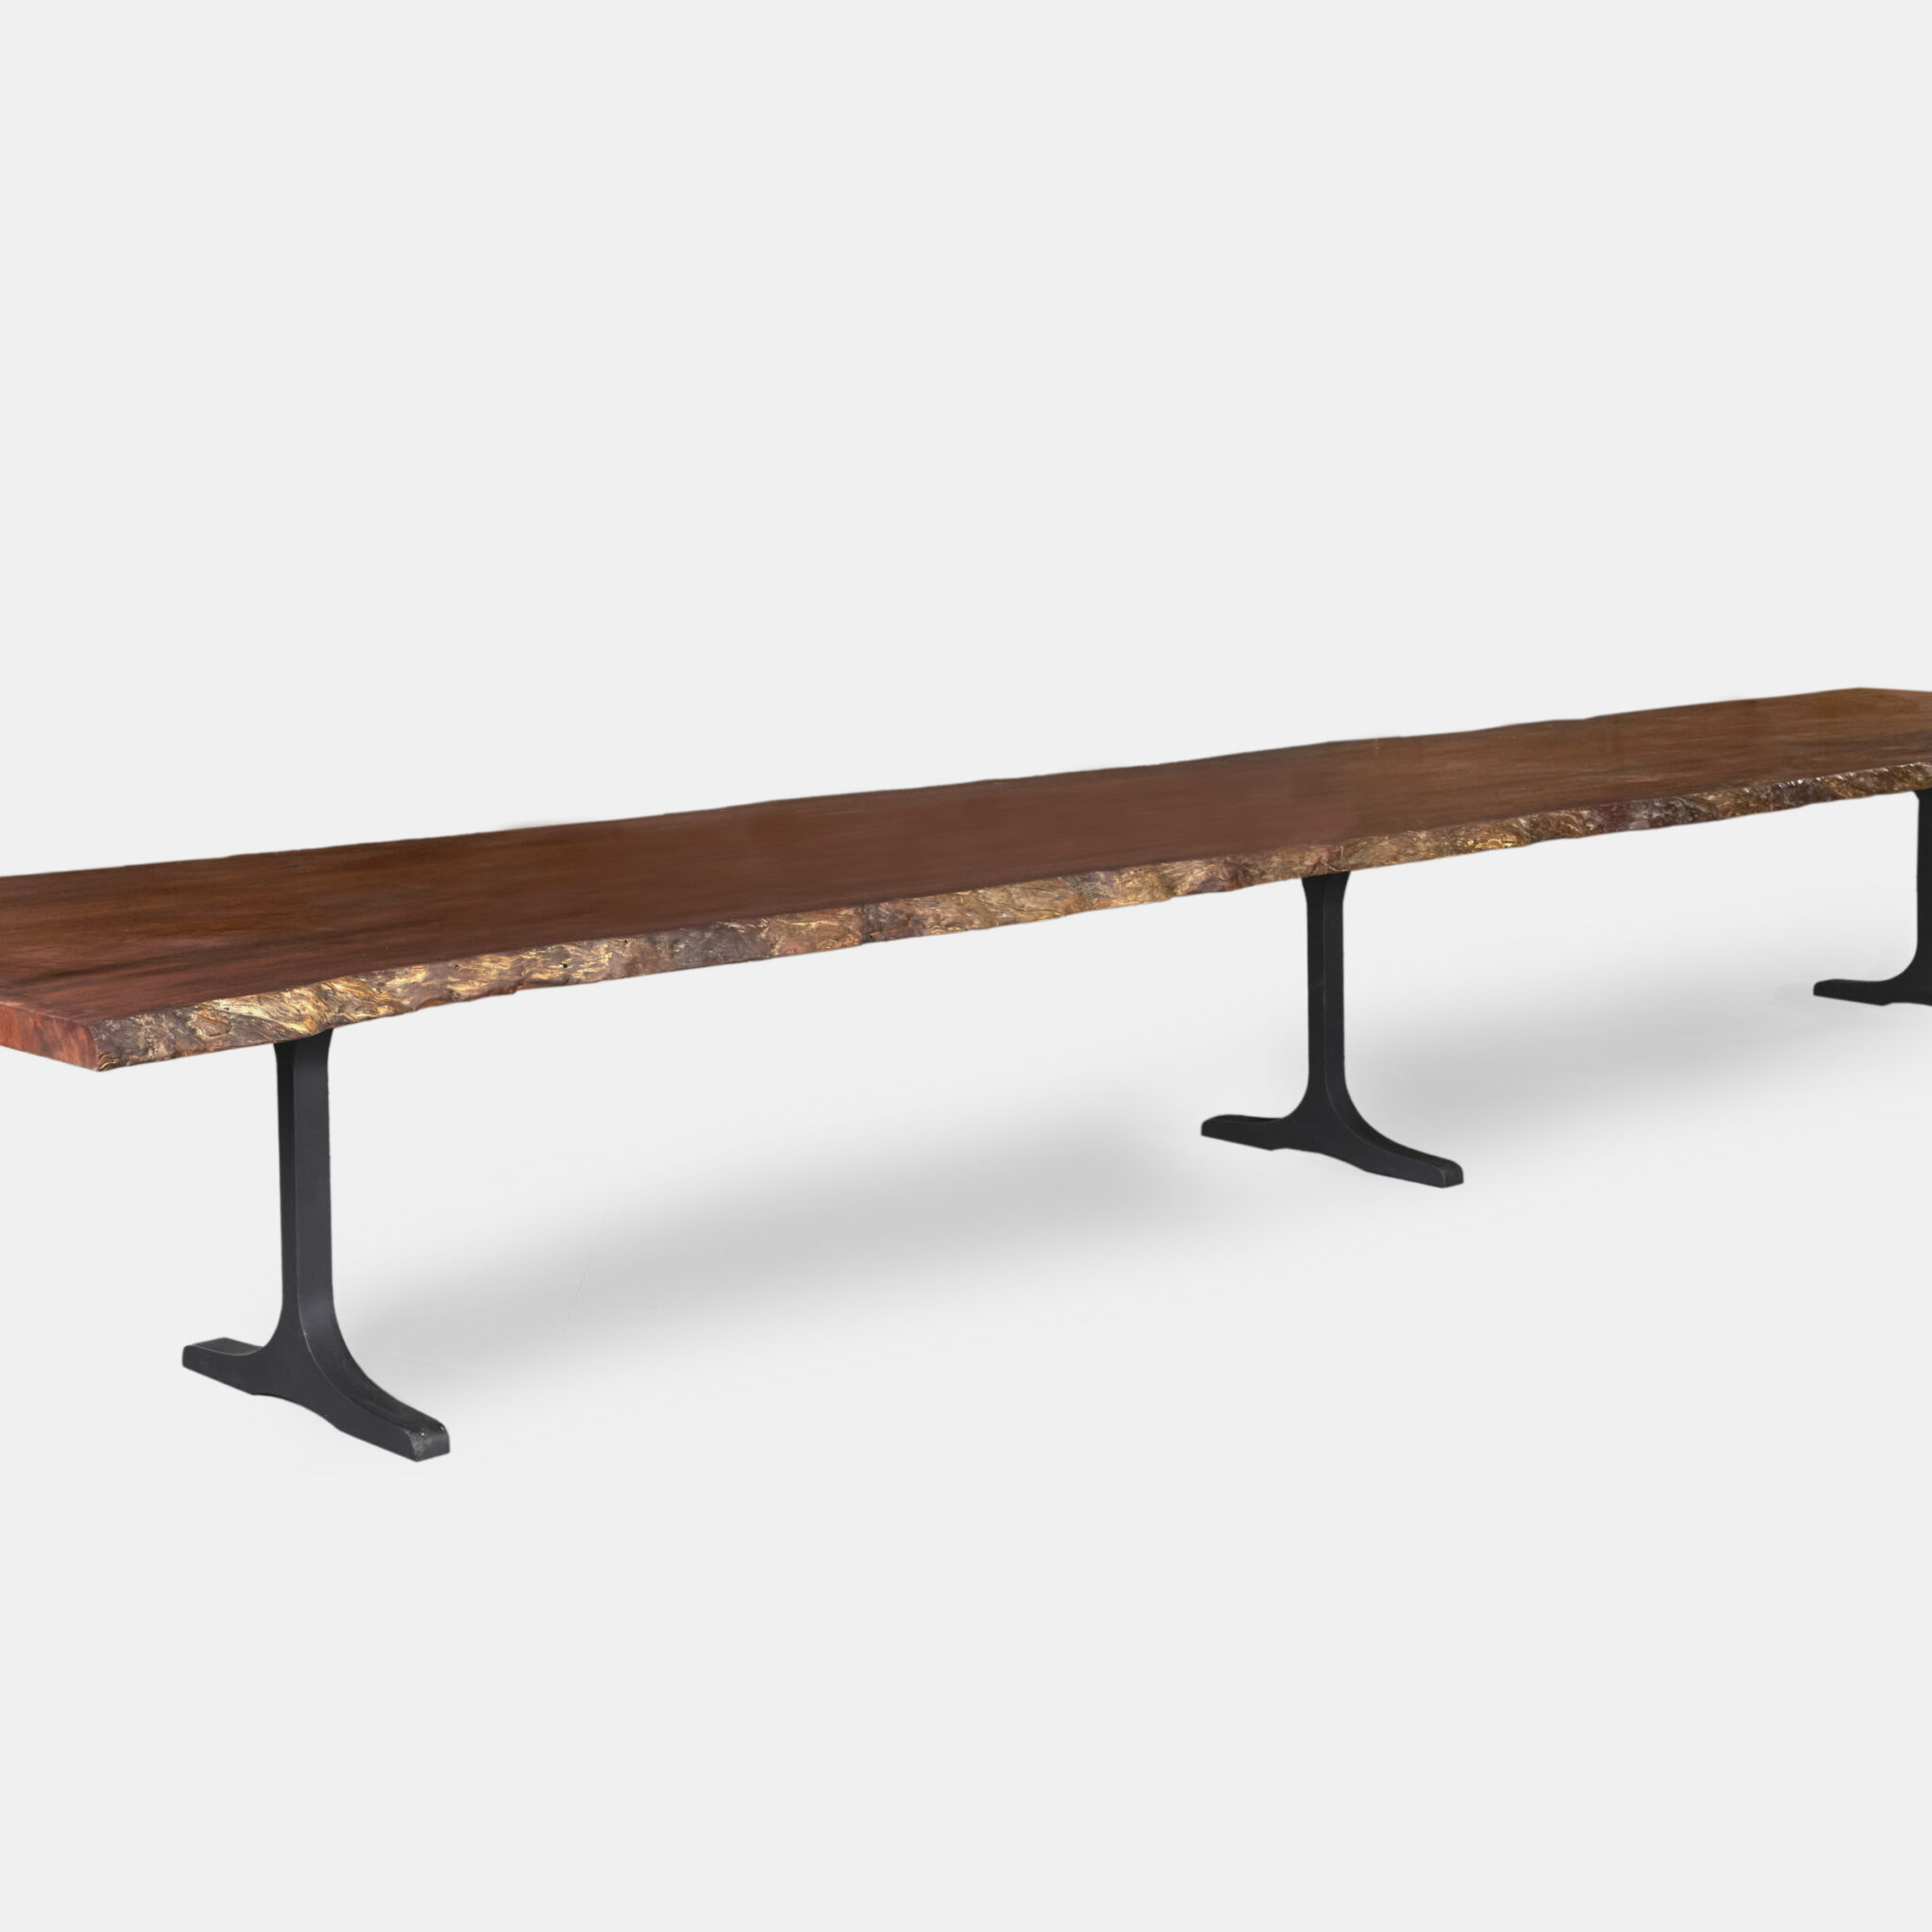 Bellevue Hill Dining Table made of Jarrah timber, showcasing its natural beauty and craftsmanship.